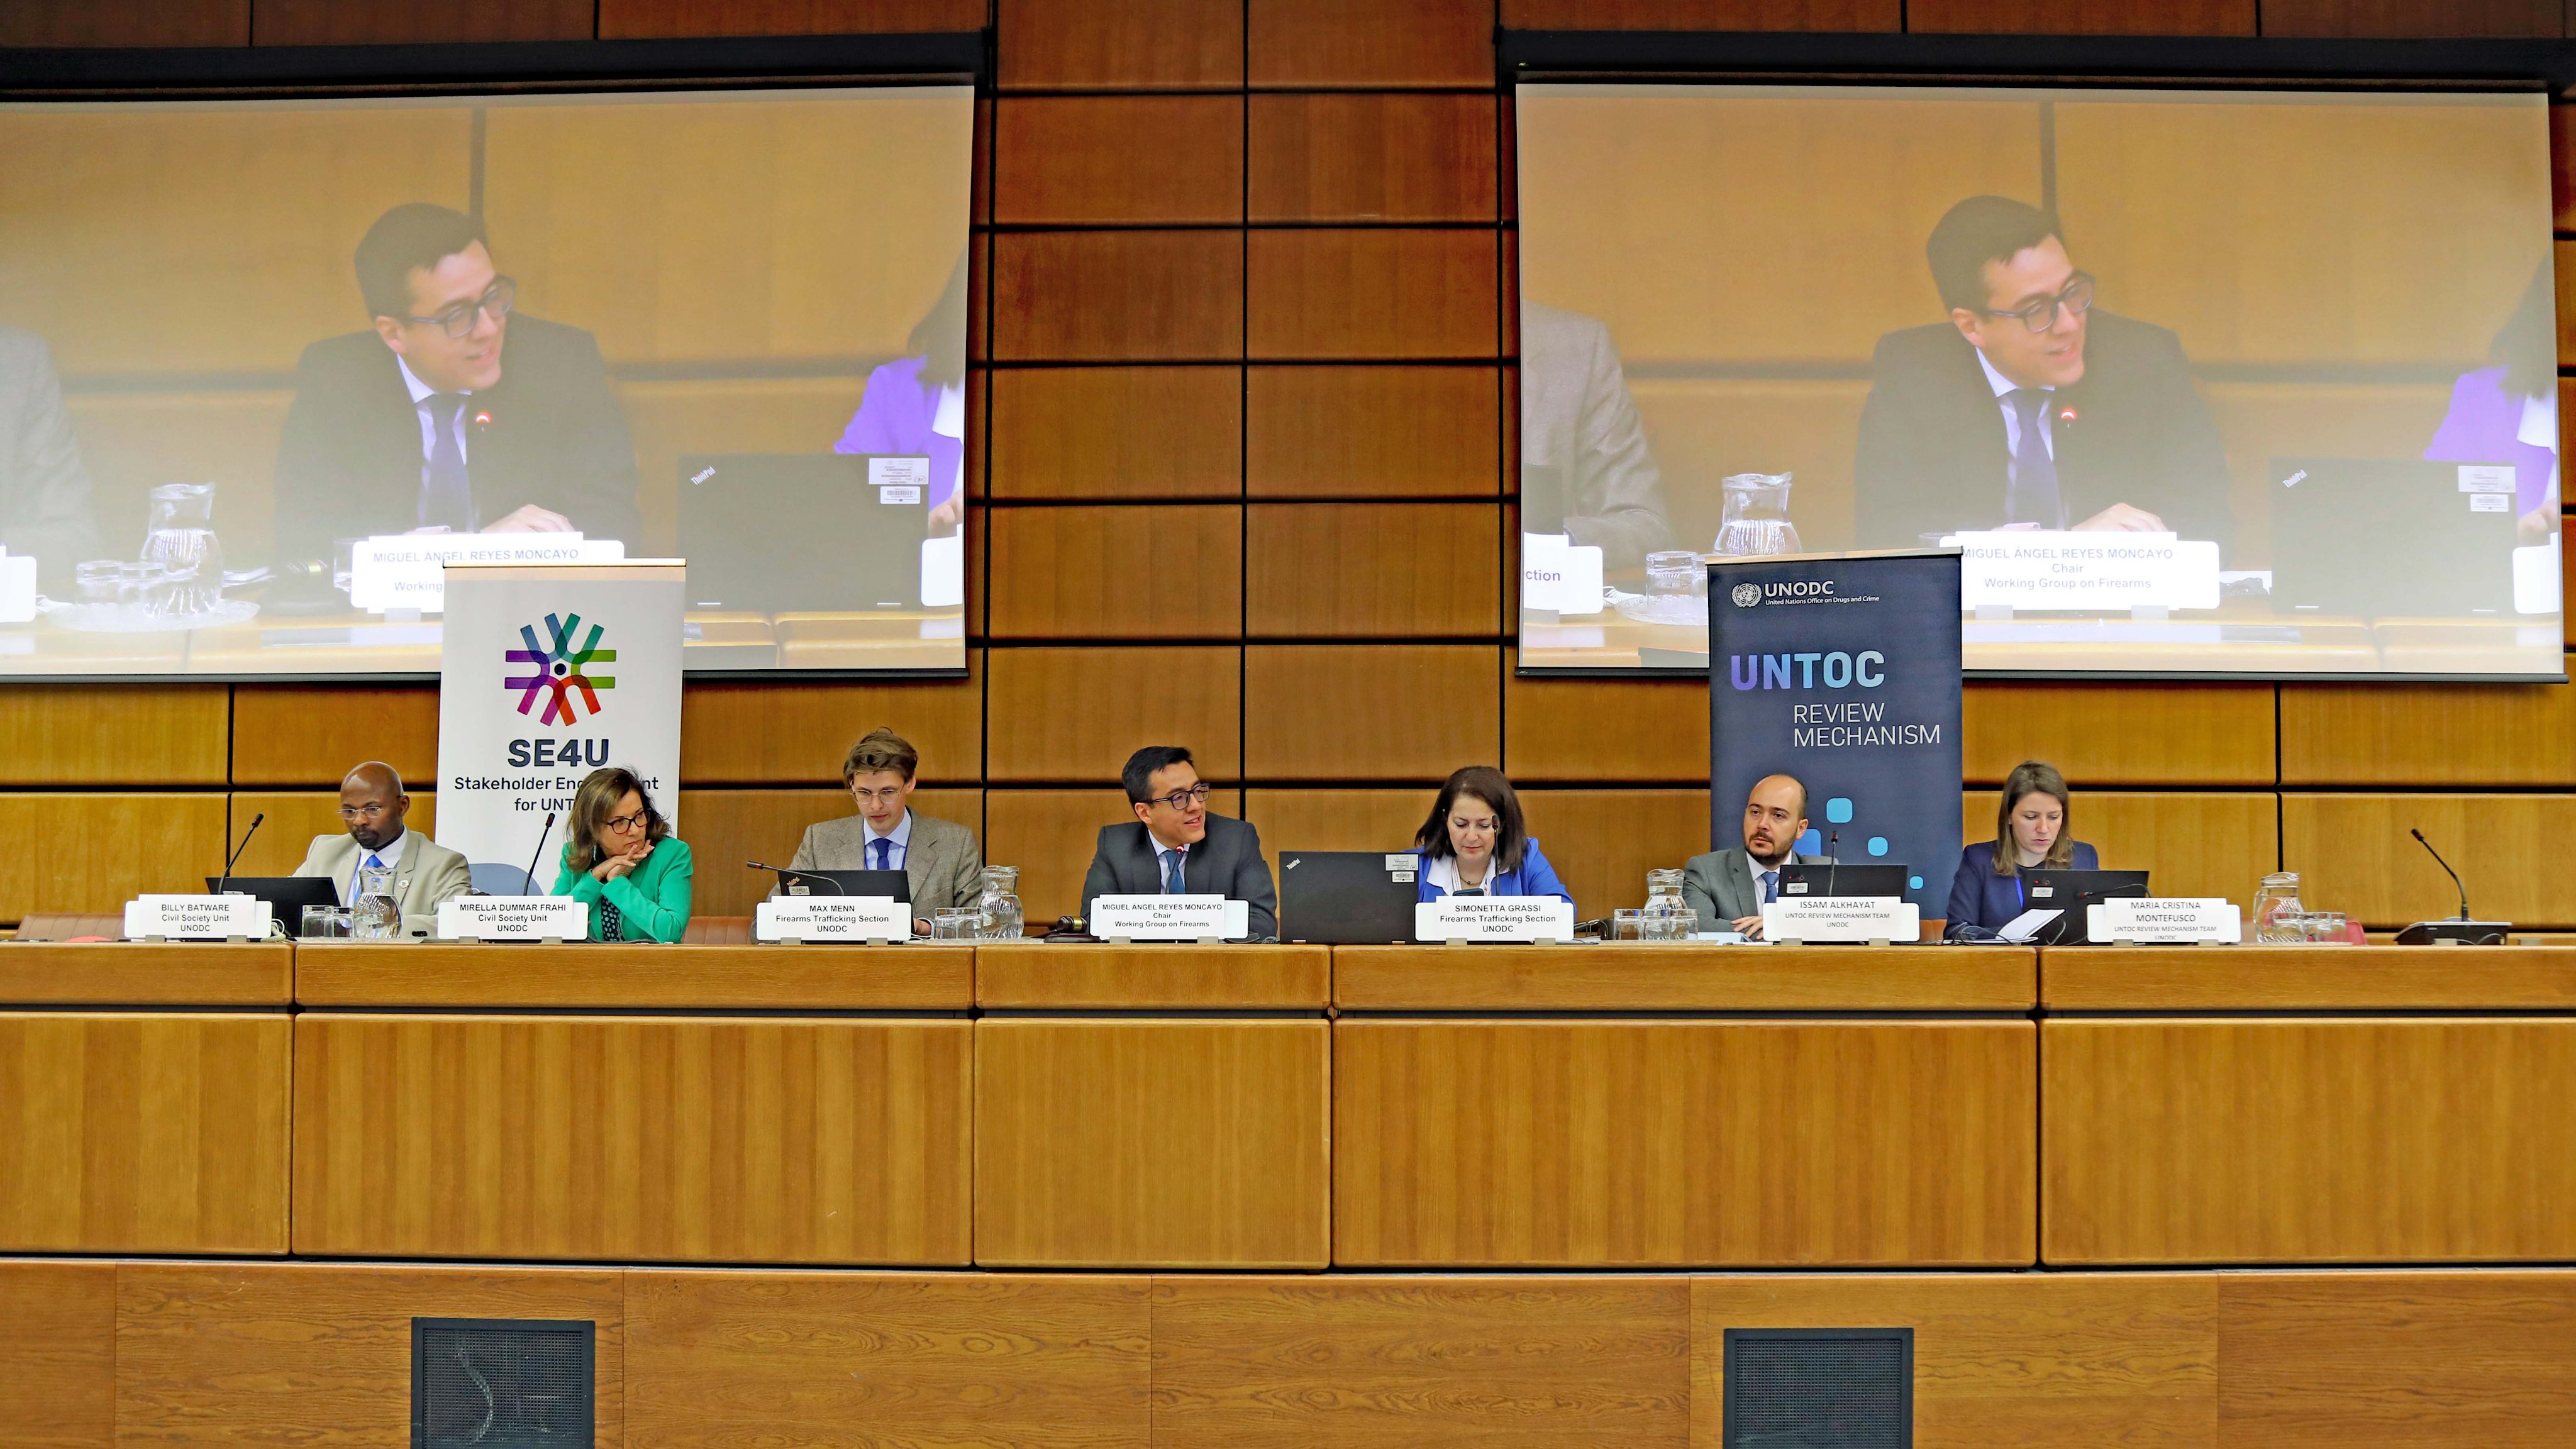 Panel with three women and four men, and their name plates. On the wall, two projector screens display the image of a man speaking who is sitting at the center of the panel. Behind the panel, on the left side, a roll up banner with the logo of SE4U Stakeholder Engagement for UNTOC and on the right side, a roll up banner with the logo of the UNTOC Review Mechanism.